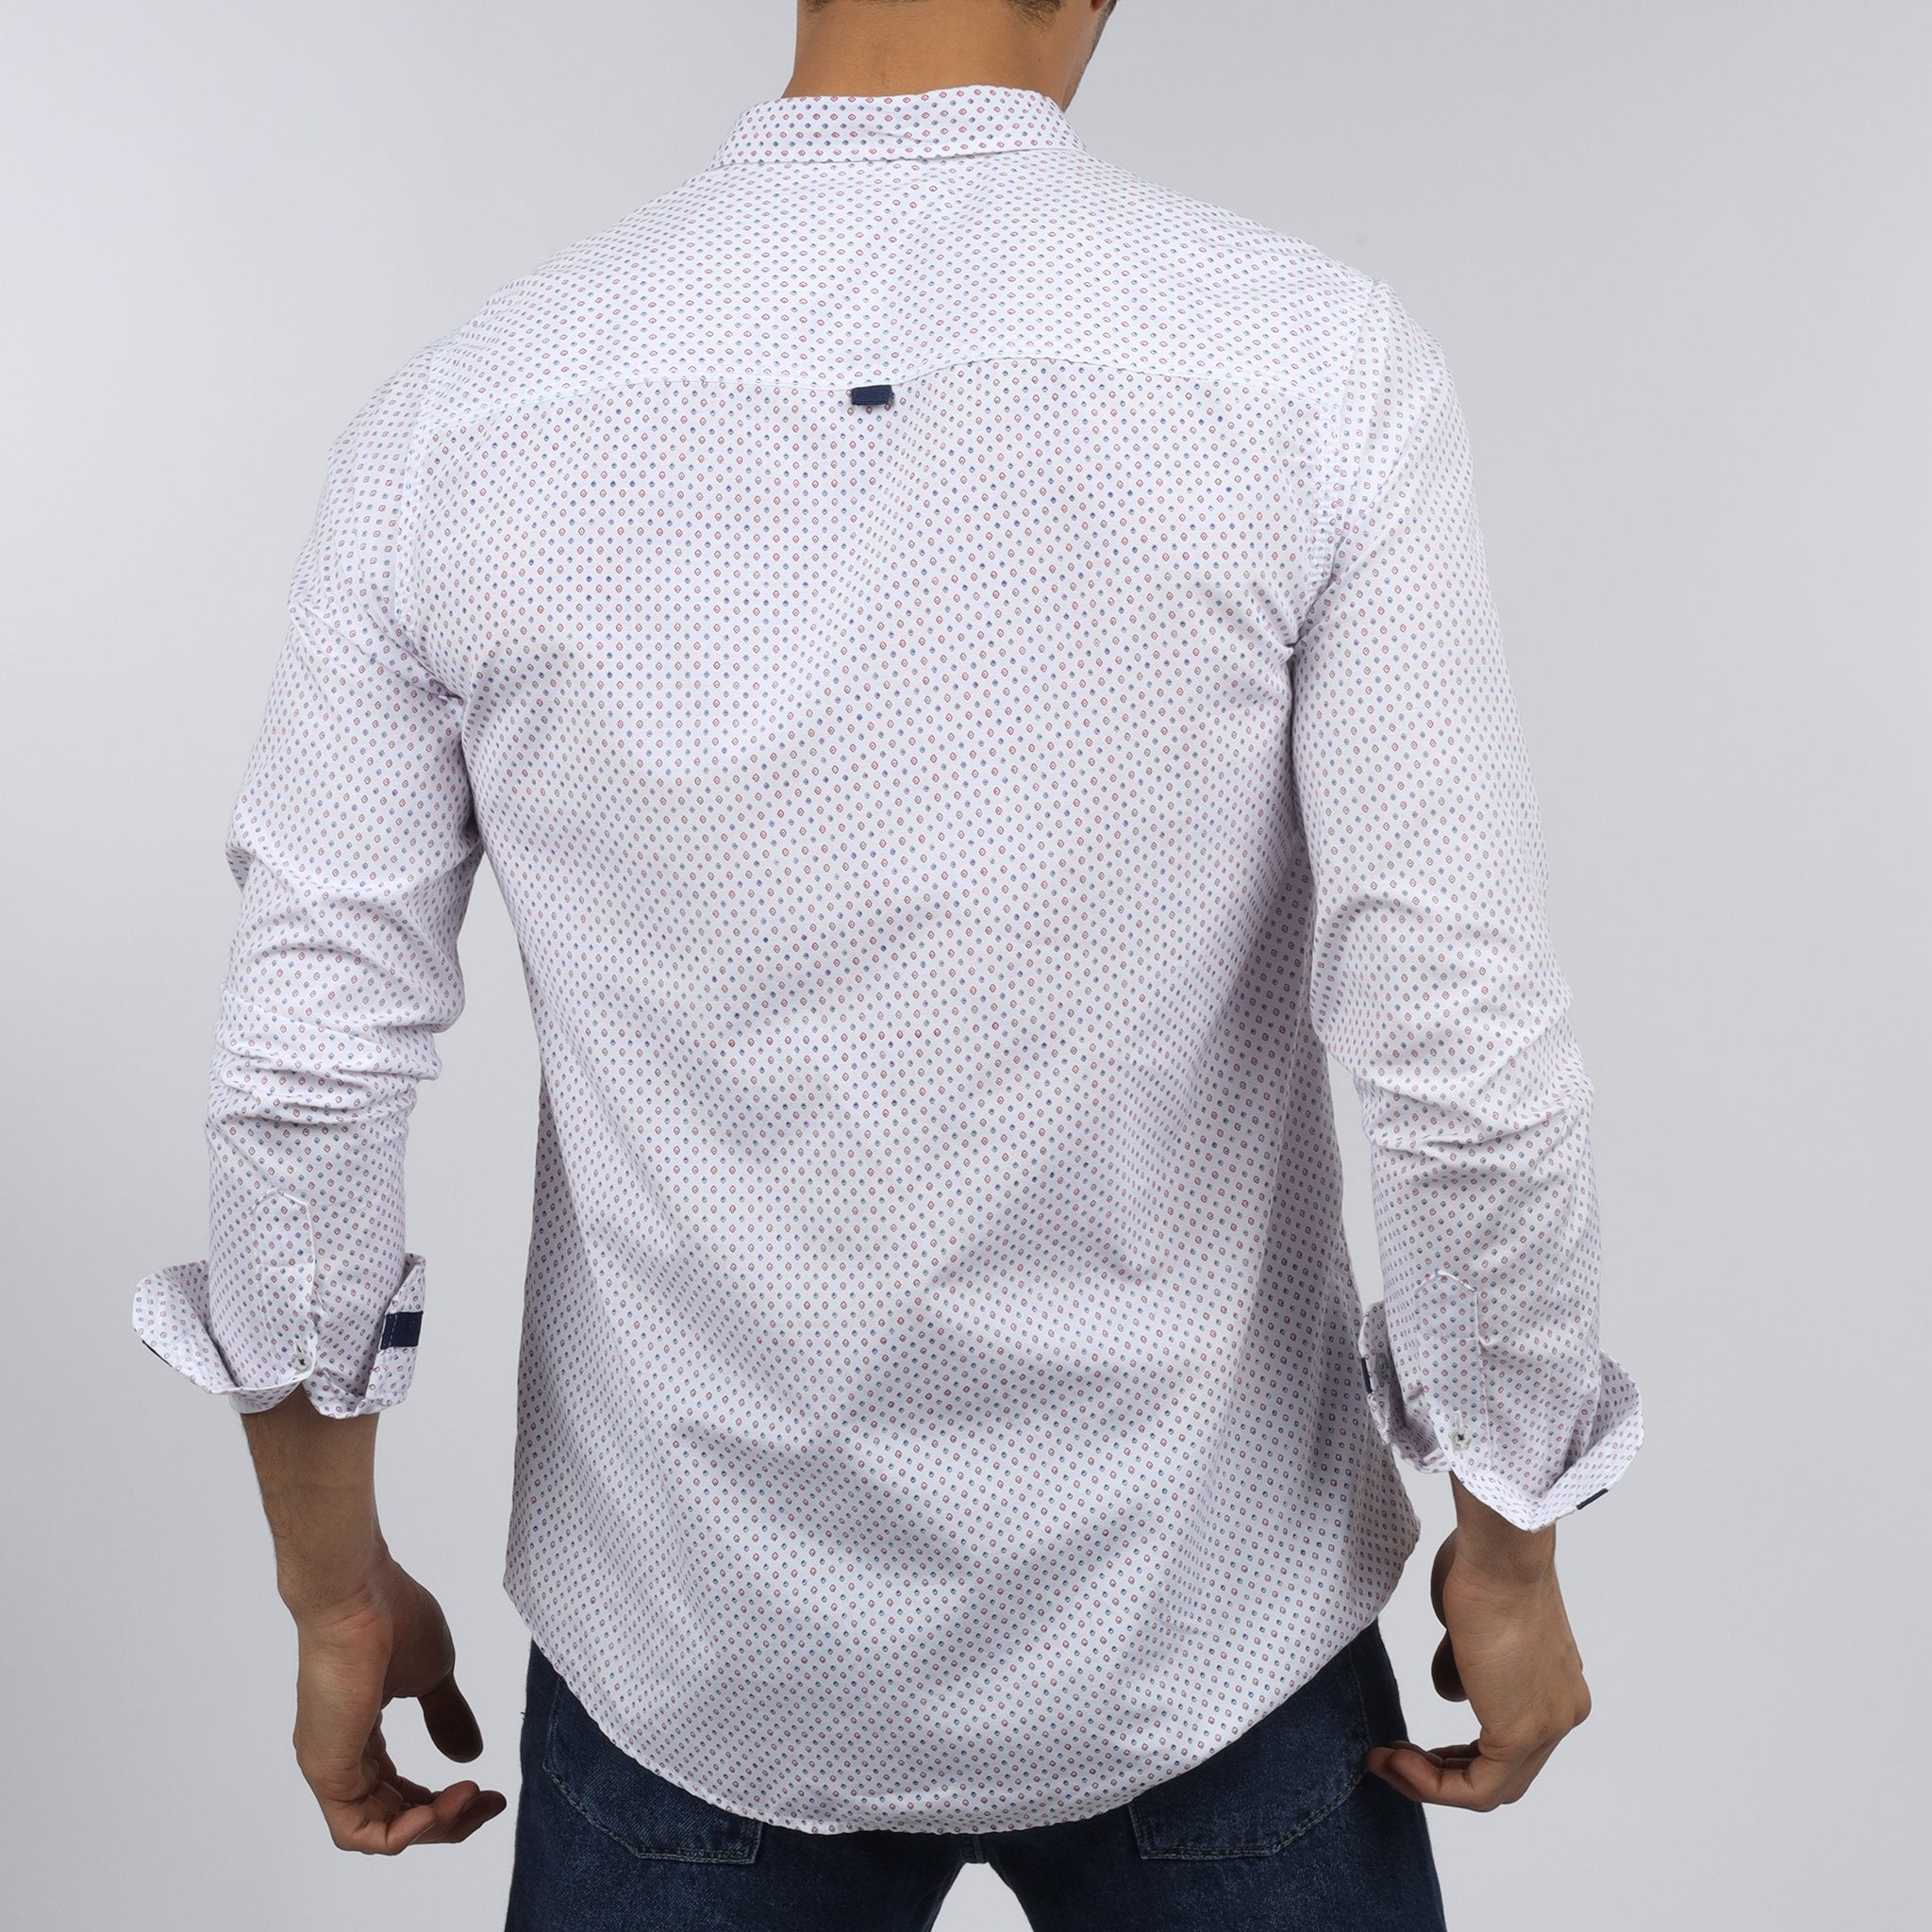 Vote-Shirt-White-Patterned